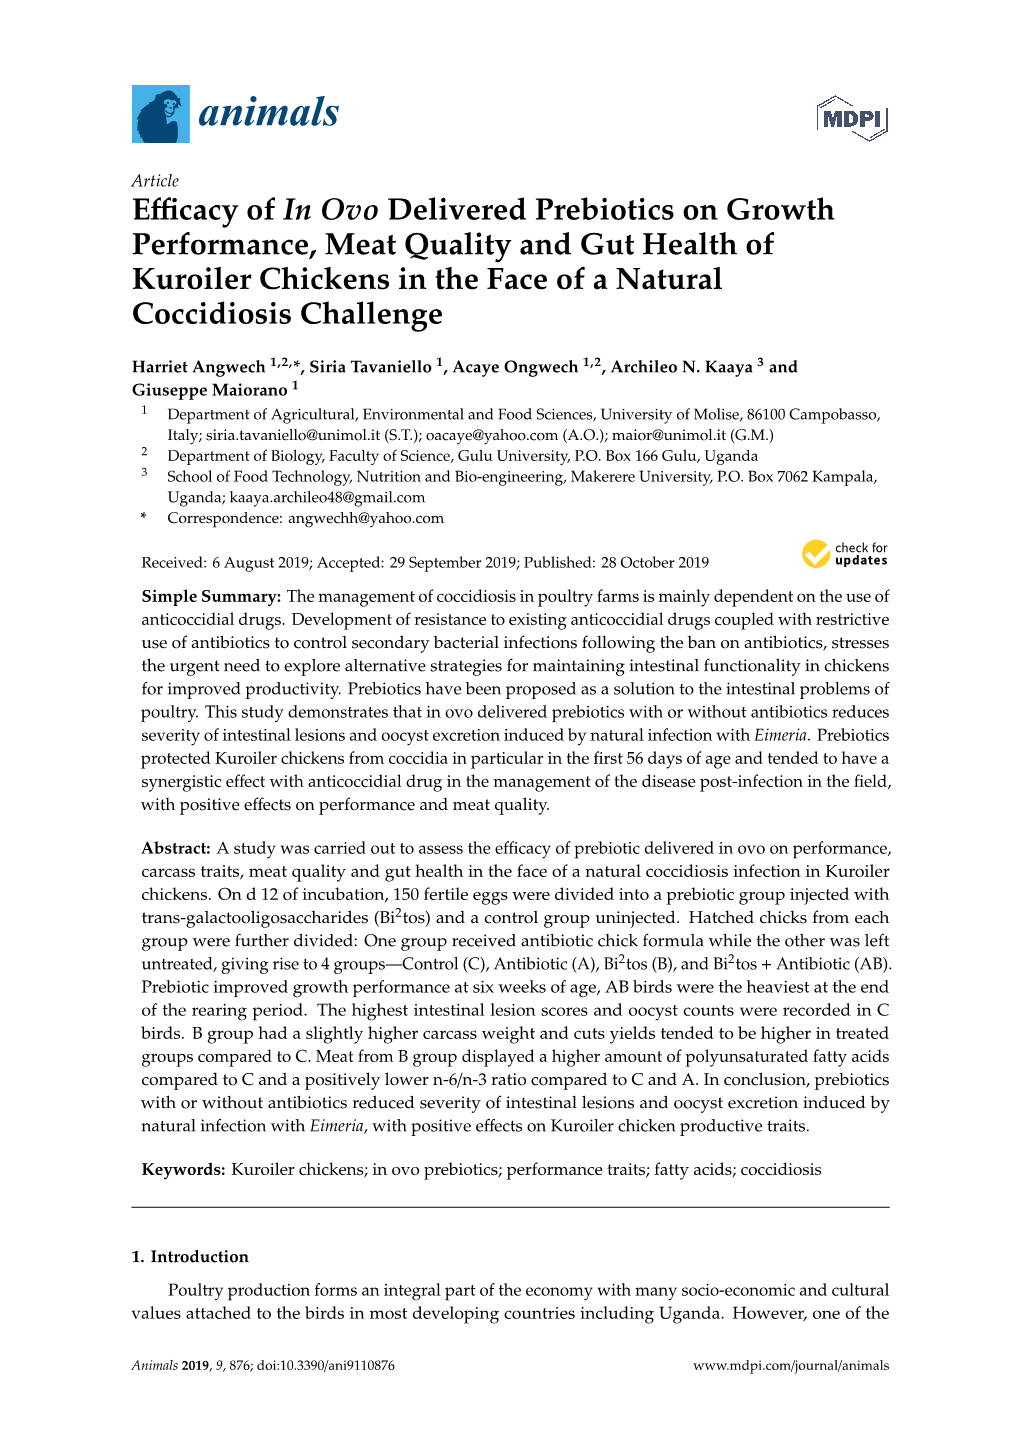 Efficacy of in Ovo Delivered Prebiotics on Growth Performance, Meat Quality and Gut Health of Kuroiler Chickens in the Face of A